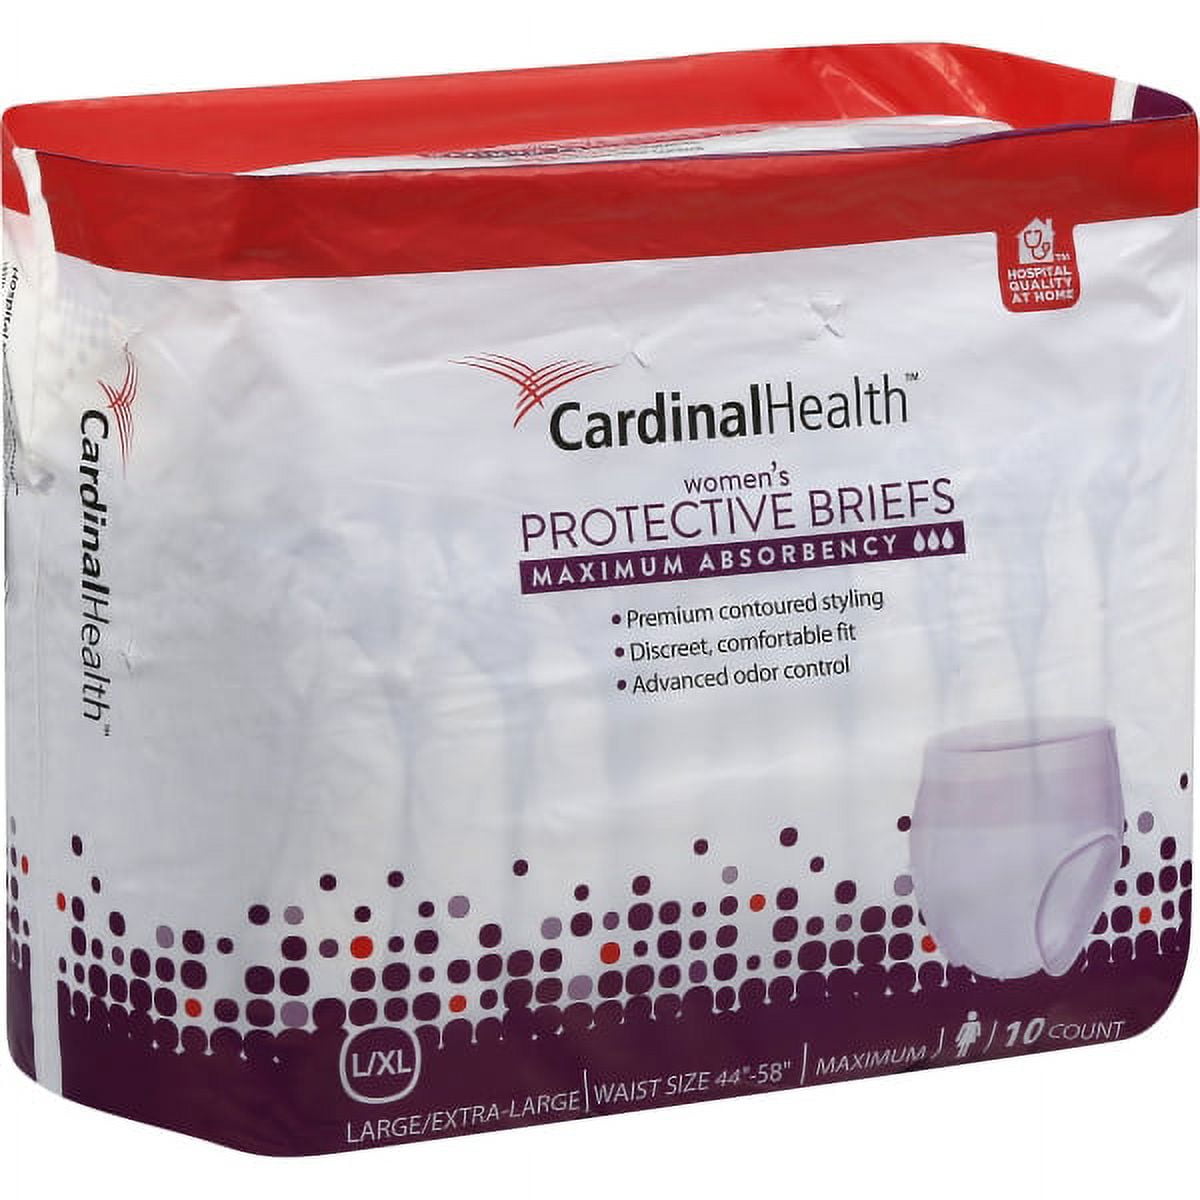 Cardinal Health Maximum Absorbency Women's Protective Briefs, Large/Extra  Large, 10 count 